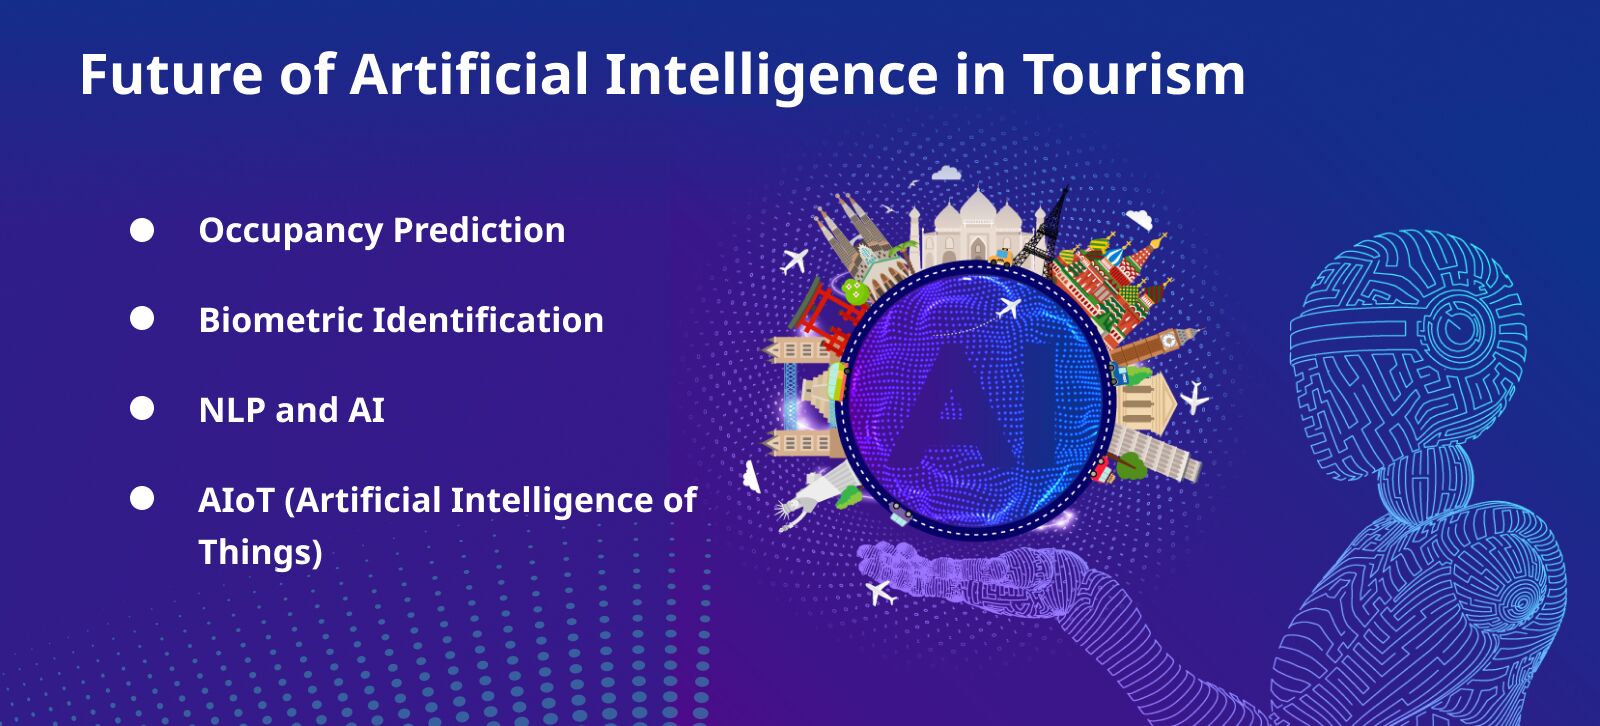 Future of Artificial Intelligence in Tourism